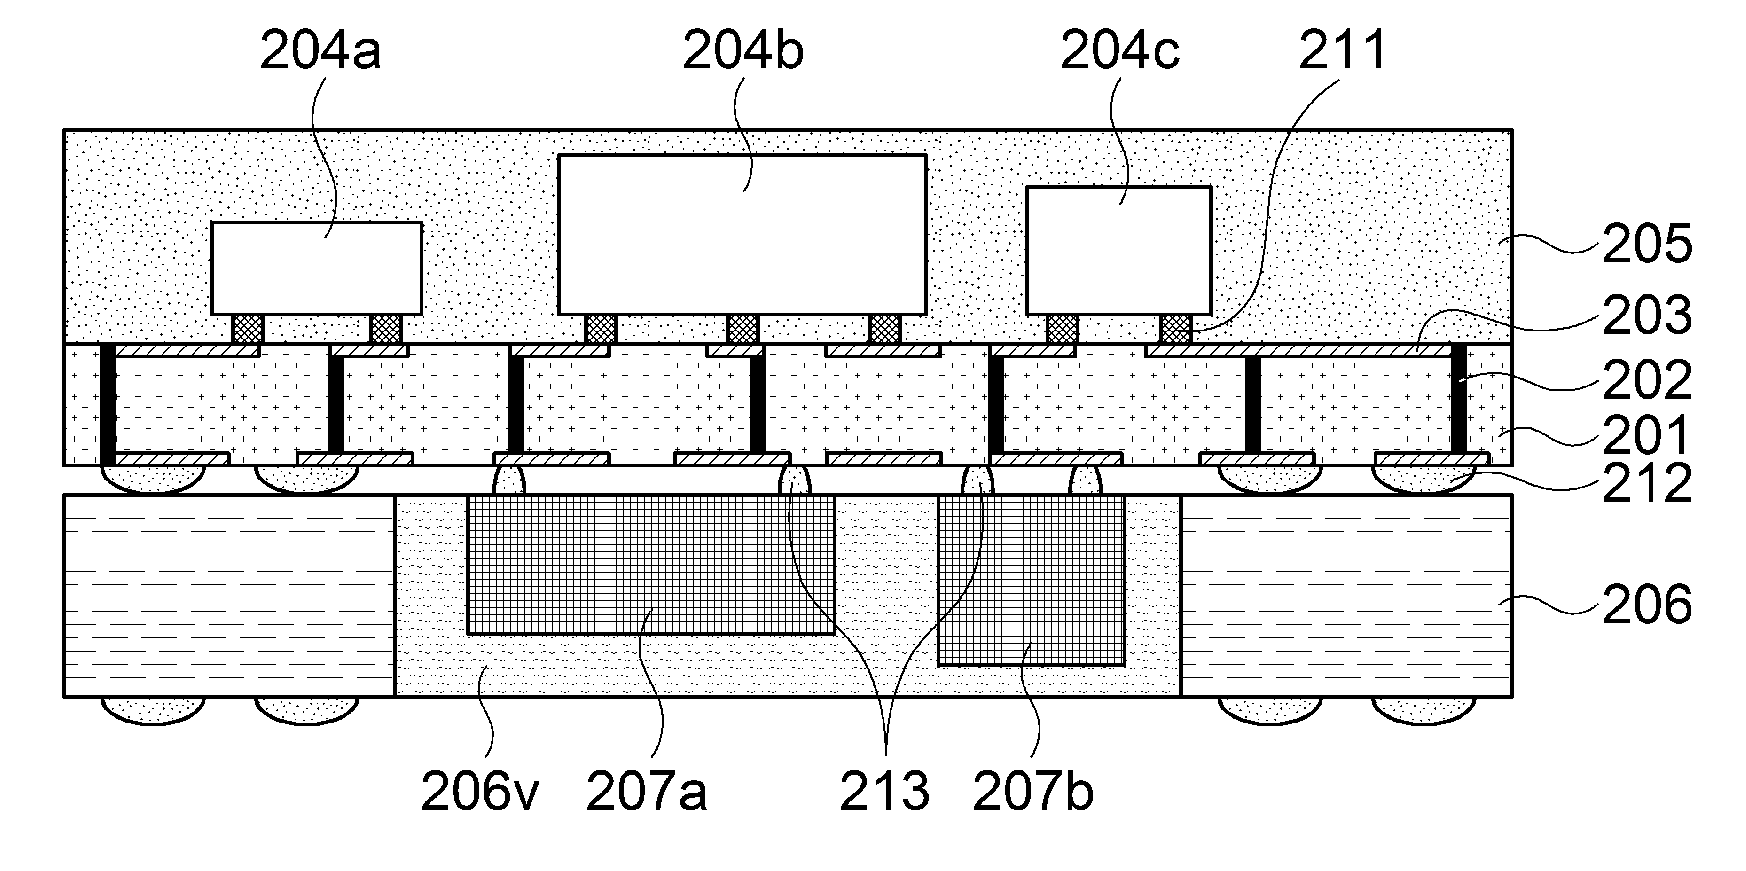 RF (radio frequency) module and method of maufacturing the same